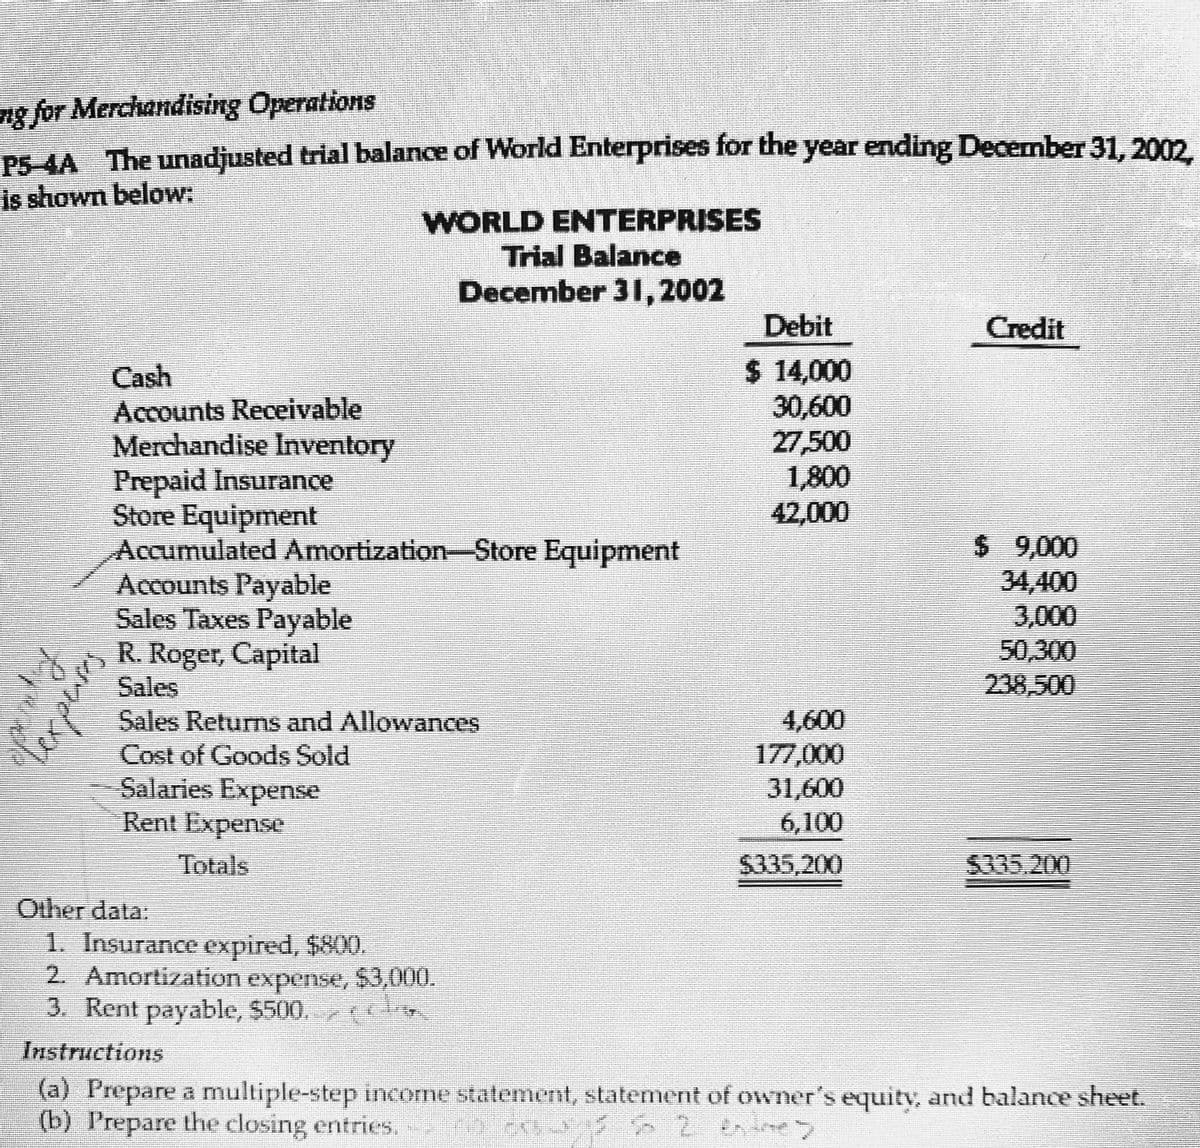 ng for Merchandising Operations
P5-4A The unadjusted trial balance of World Enterprises for the year ending December 31, 2002,
is shown below:
y
Cash
Accounts Receivable
Merchandise Inventory
Prepaid Insurance
Store Equipment
Accumulated Amortization Store Equipment
Accounts Payable
Sales Taxes Payable
R. Roger, Capital
Sales
Sales Returns and Allowances
Cost of Goods Sold
expenses
WORLD ENTERPRISES
Trial Balance
December 31, 2002
Salaries Expense
Rent Expense
Totals
Other data:
1. Insurance expired, $800.
2. Amortization expense, $3,000.
3. Rent payable, $500. (cho
Instructions
Debit
$ 14,000
30,600
27,500
1,800
42,000
4,600
177,000
31,600
6,100
$335,200
Credit
$ 9,000
34,400
3,000
50,300
238,500
$335.200
(a) Prepare a multiple-step income statement, statement of owner's equity, and balance sheet.
(b) Prepare the closing entries.
5035 5